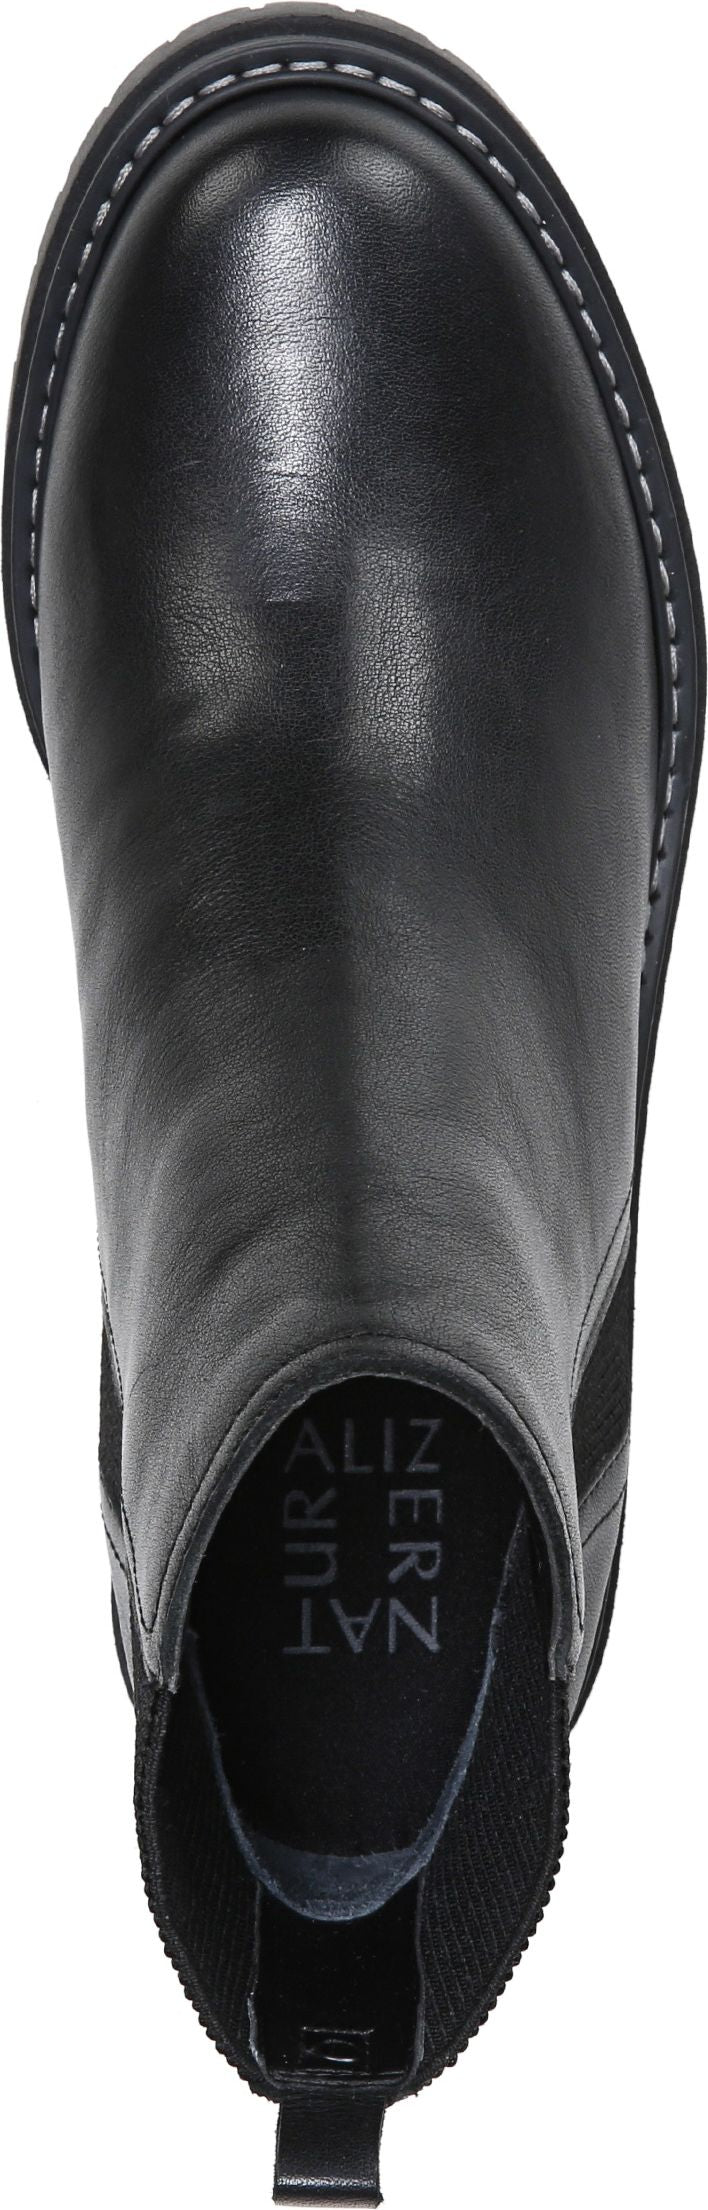 Naturalizer Boots Jadyn Black Leather